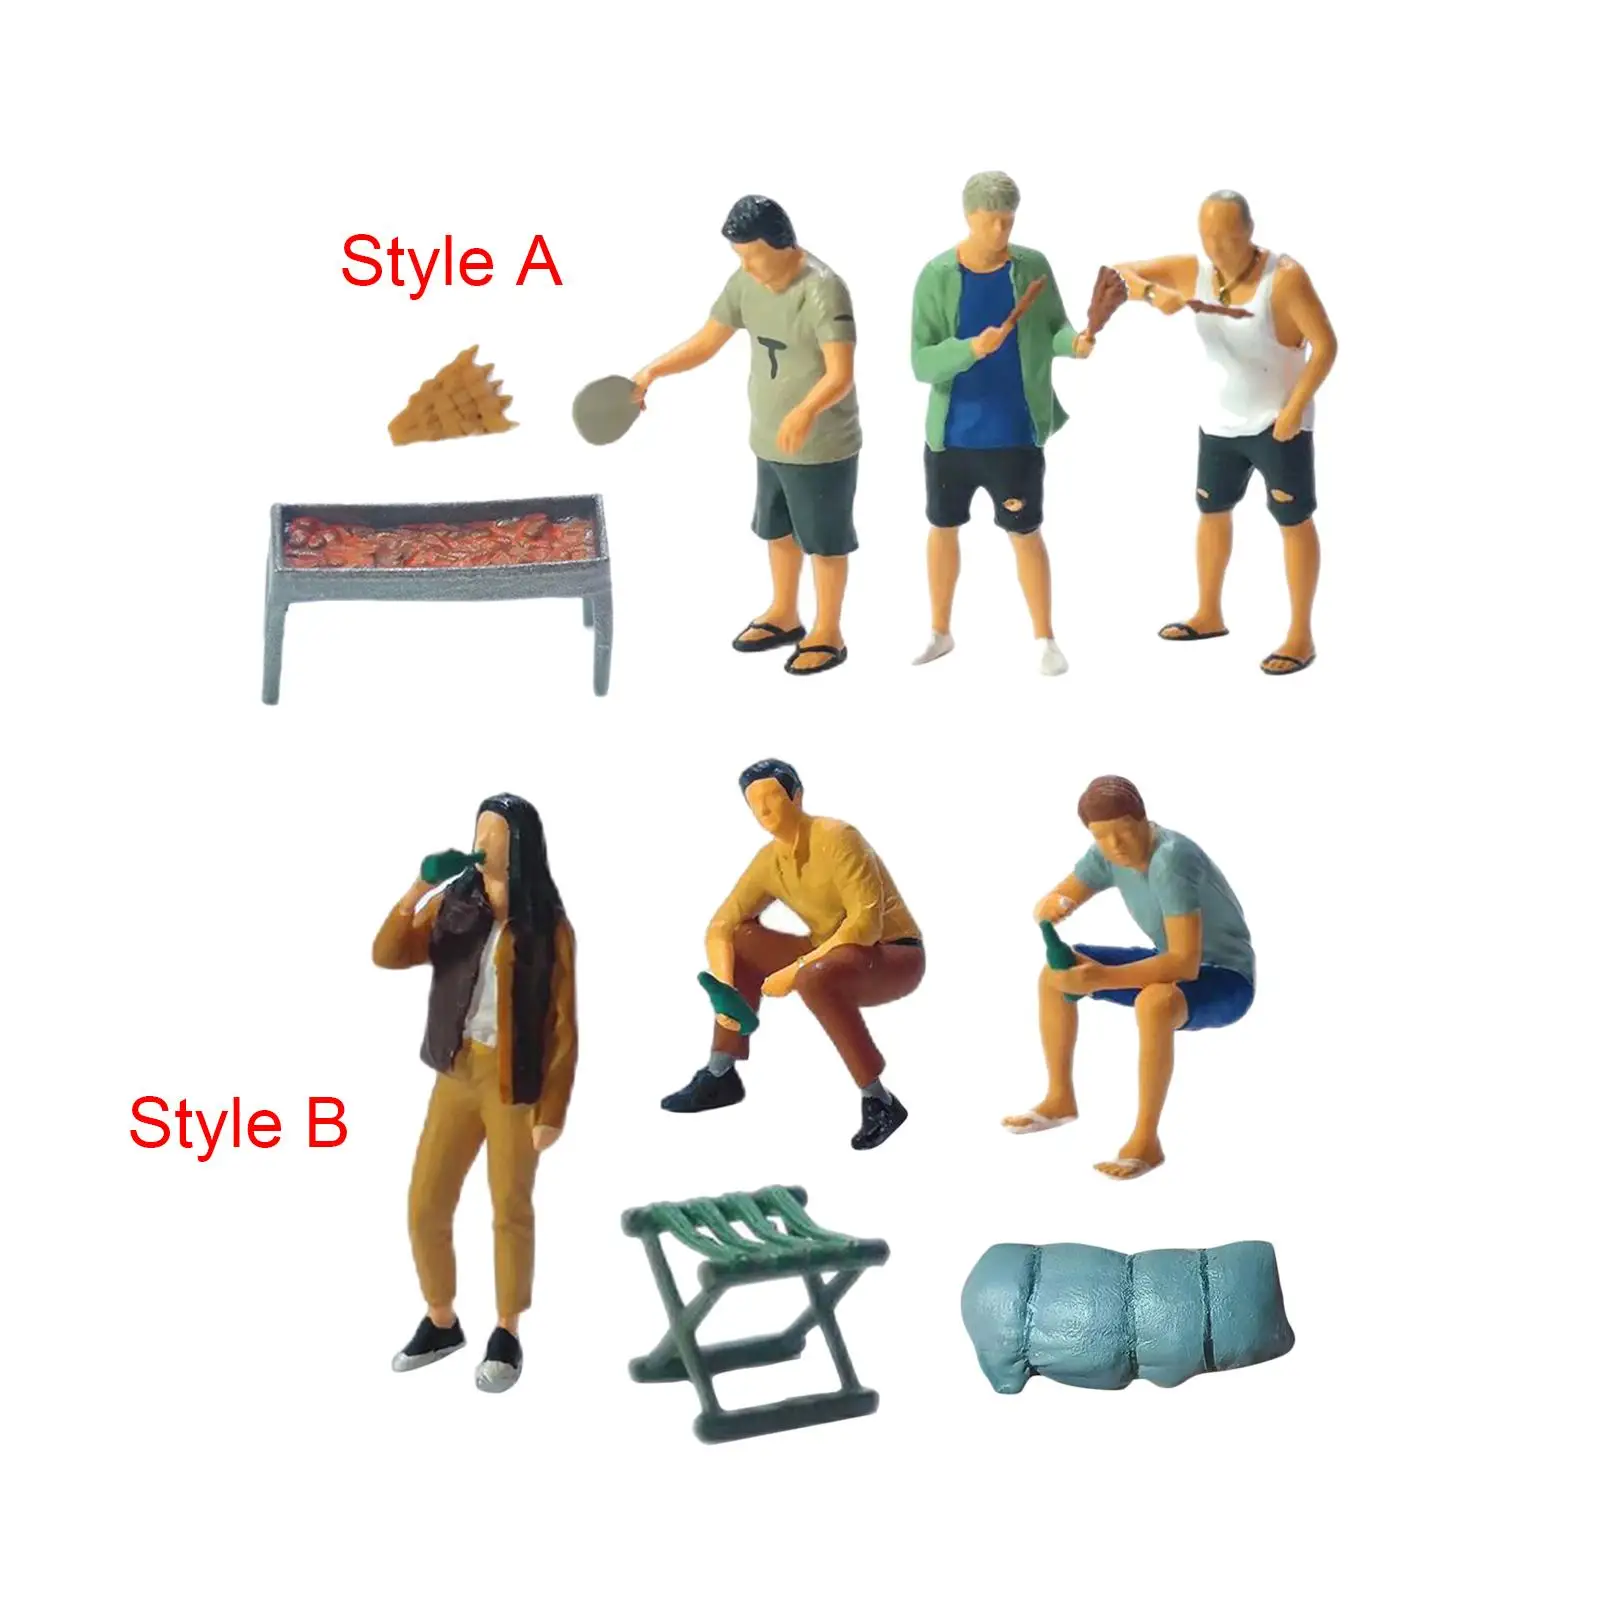 5x 1/64 BBQ People Figures Set Micro Landscape Movie Props Sand Table Layout Decoration Miniature Resin Figurines Dioramas Decor